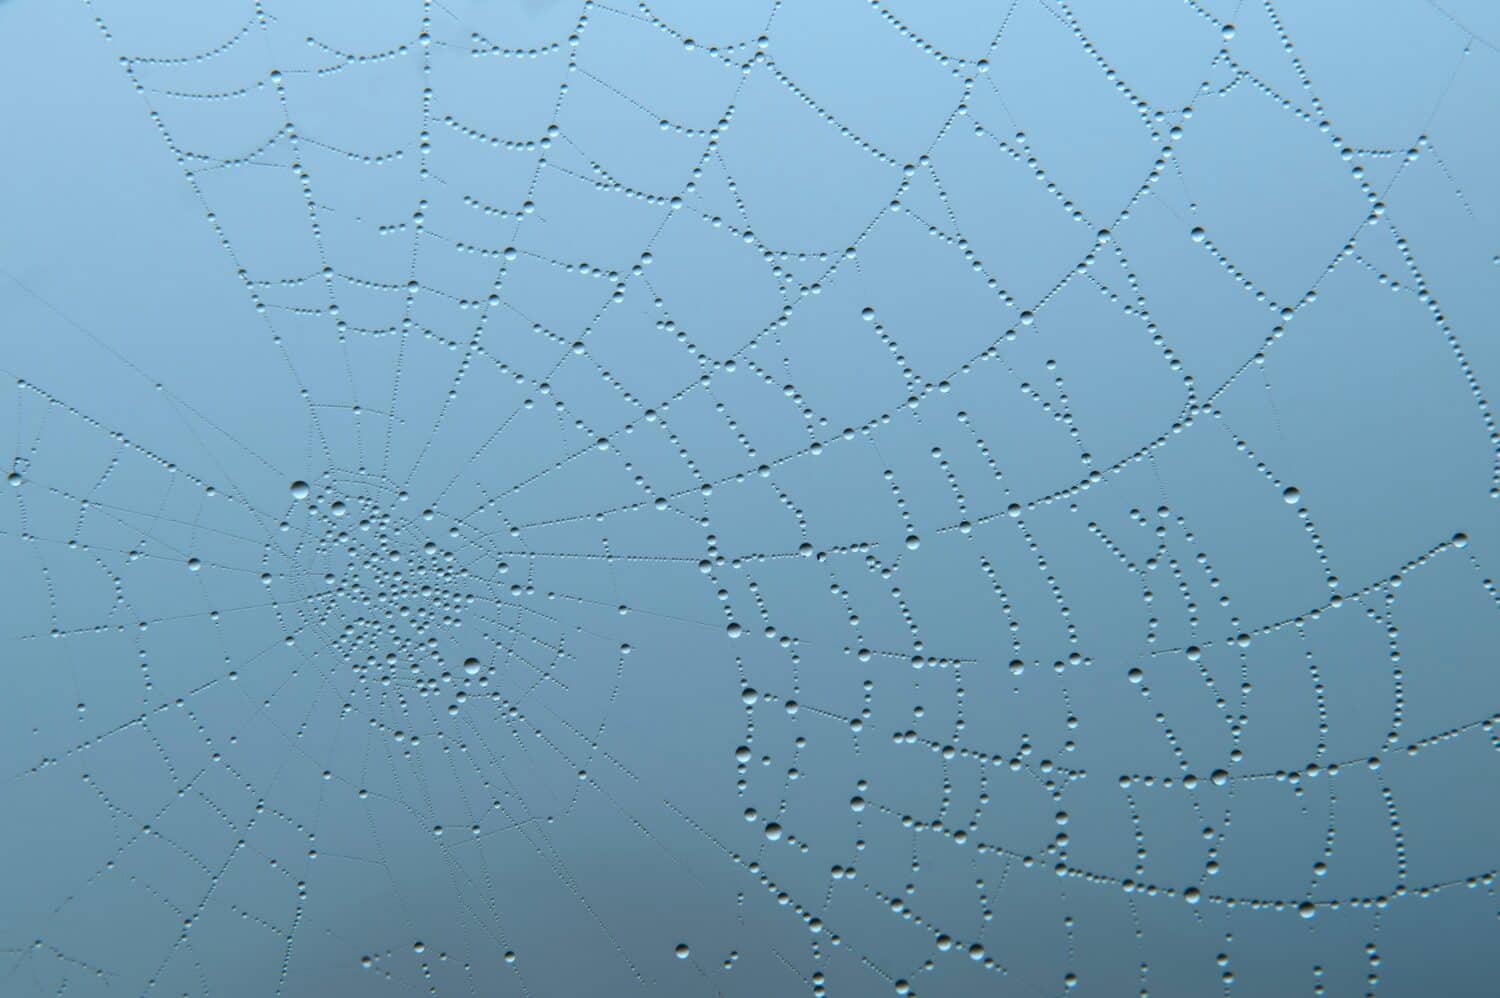 Spider web in foggy weather. The web with dewdrops shimmers in the sun's rays. Spider web of dew drops. Pokut Plateau, Rize.